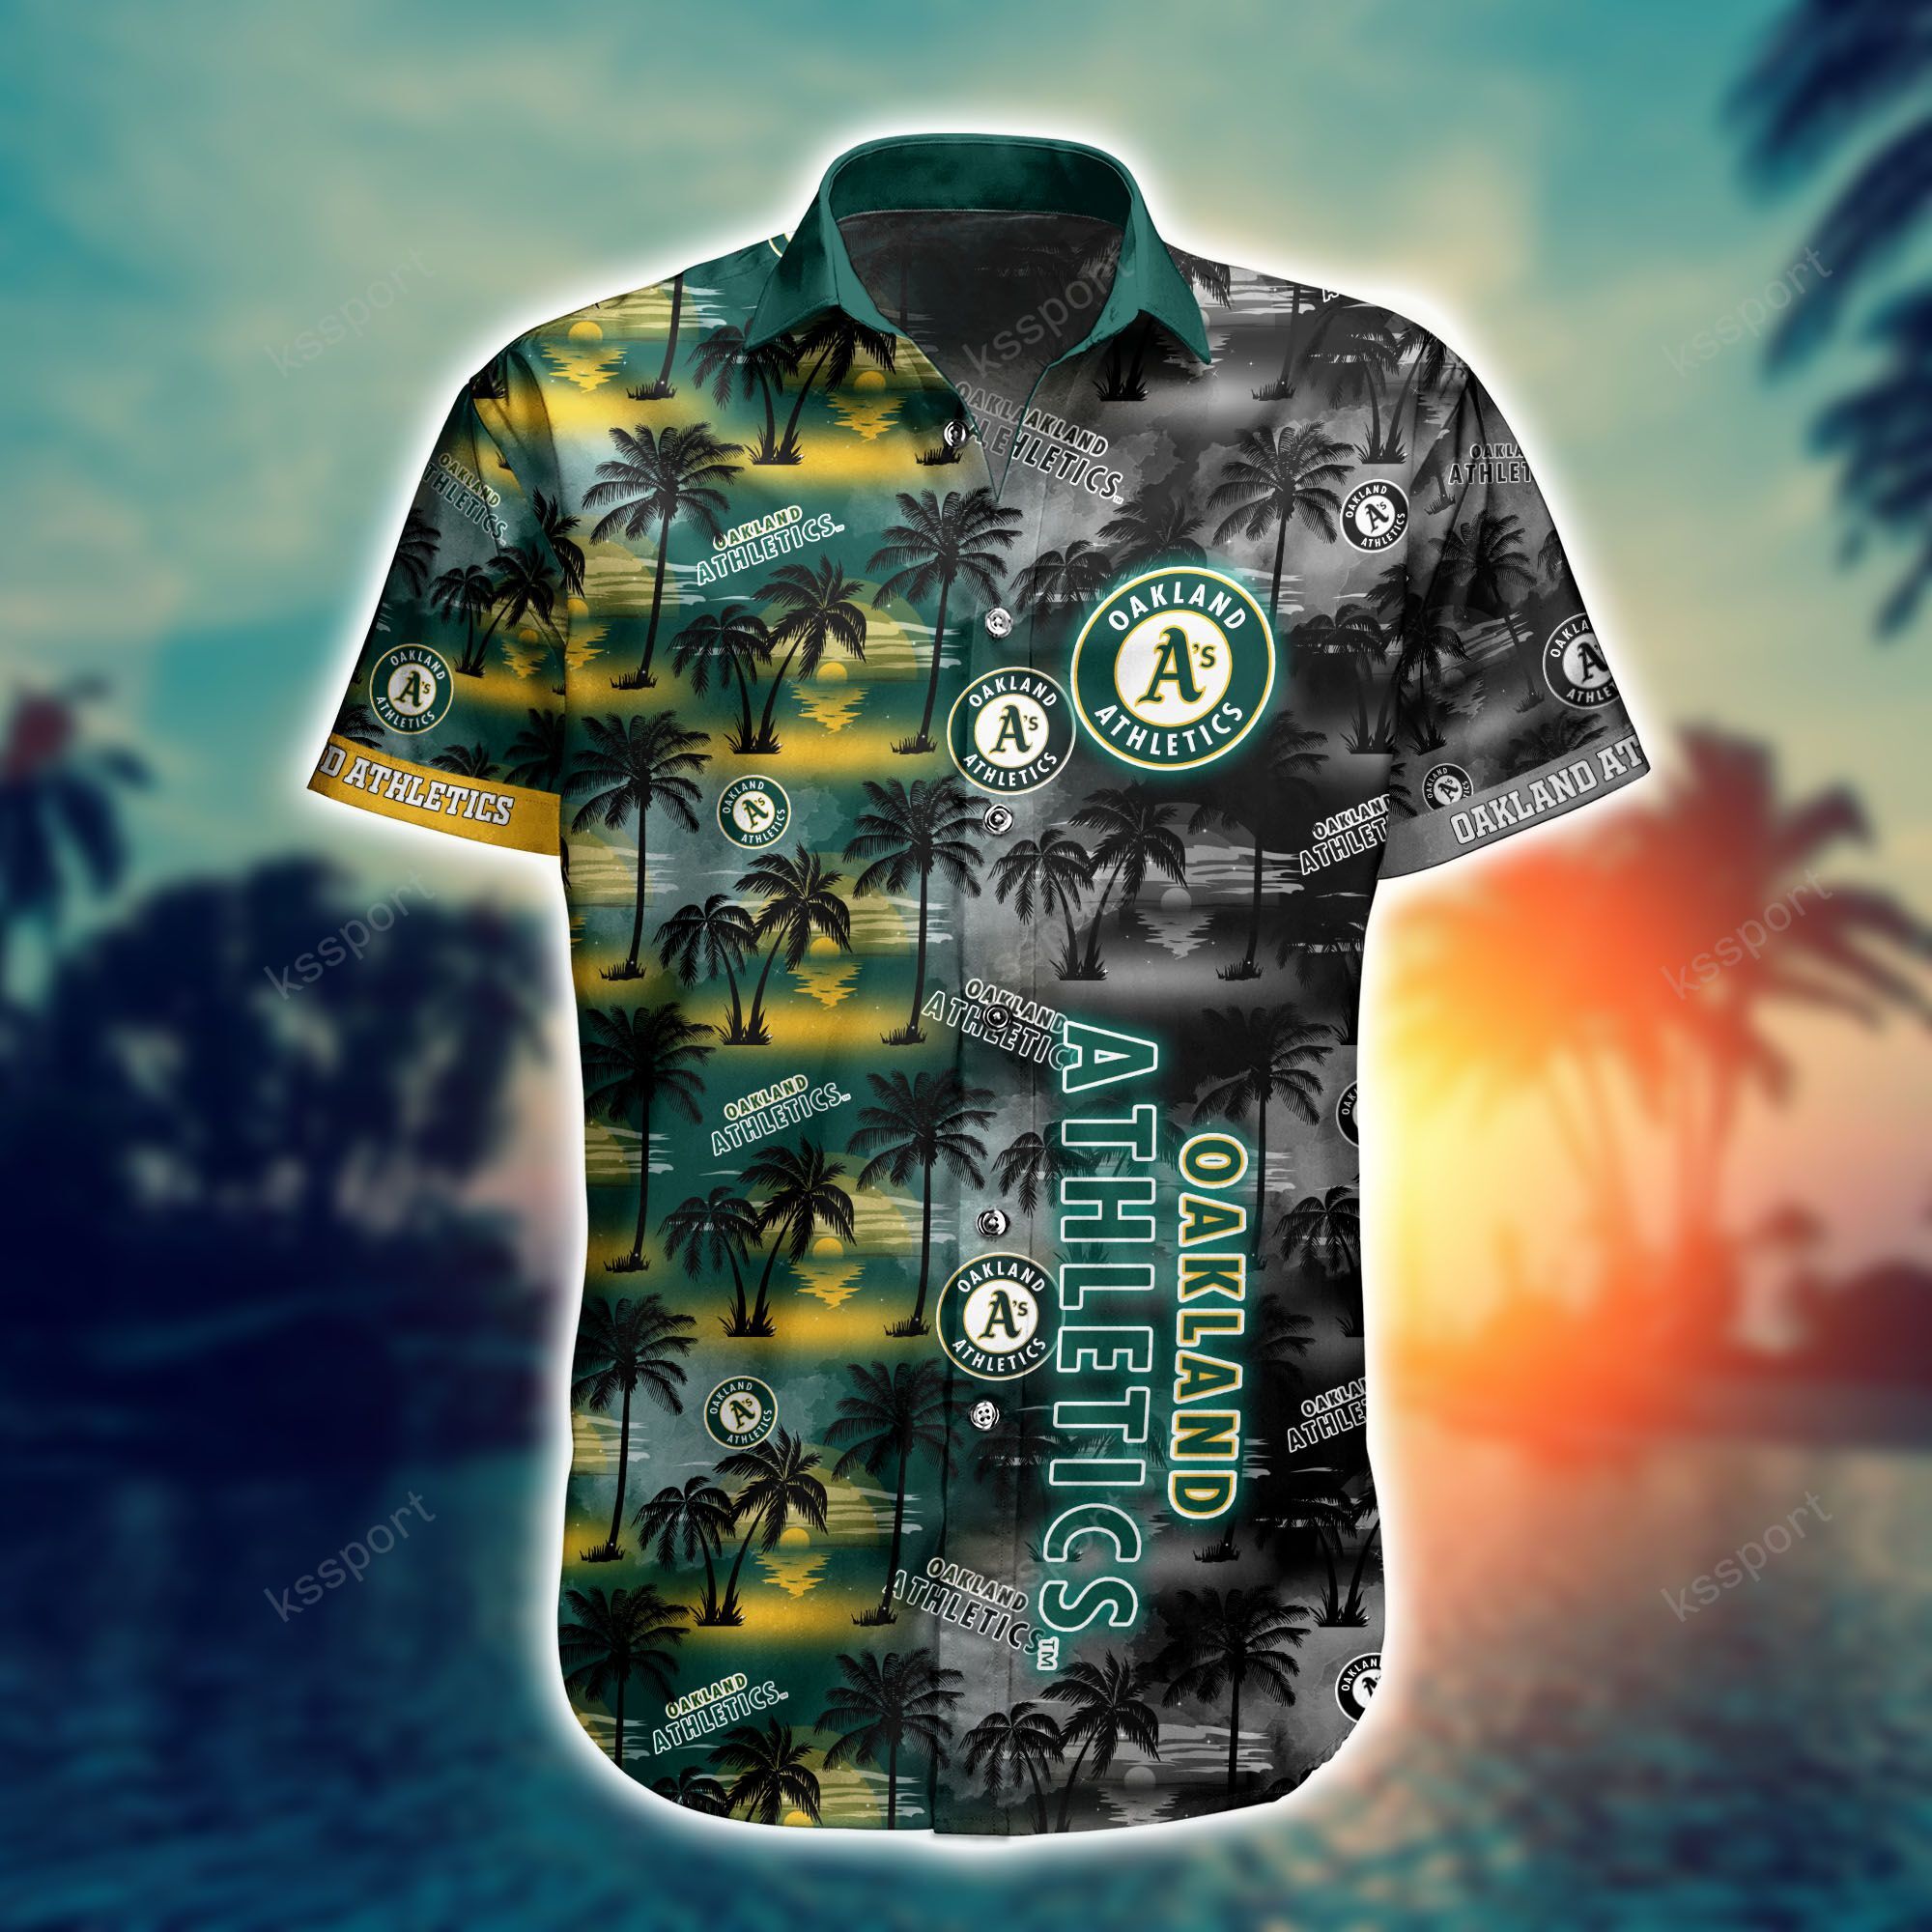 Top cool Hawaiian shirt 2022 - Make sure you get yours today before they run out! 232